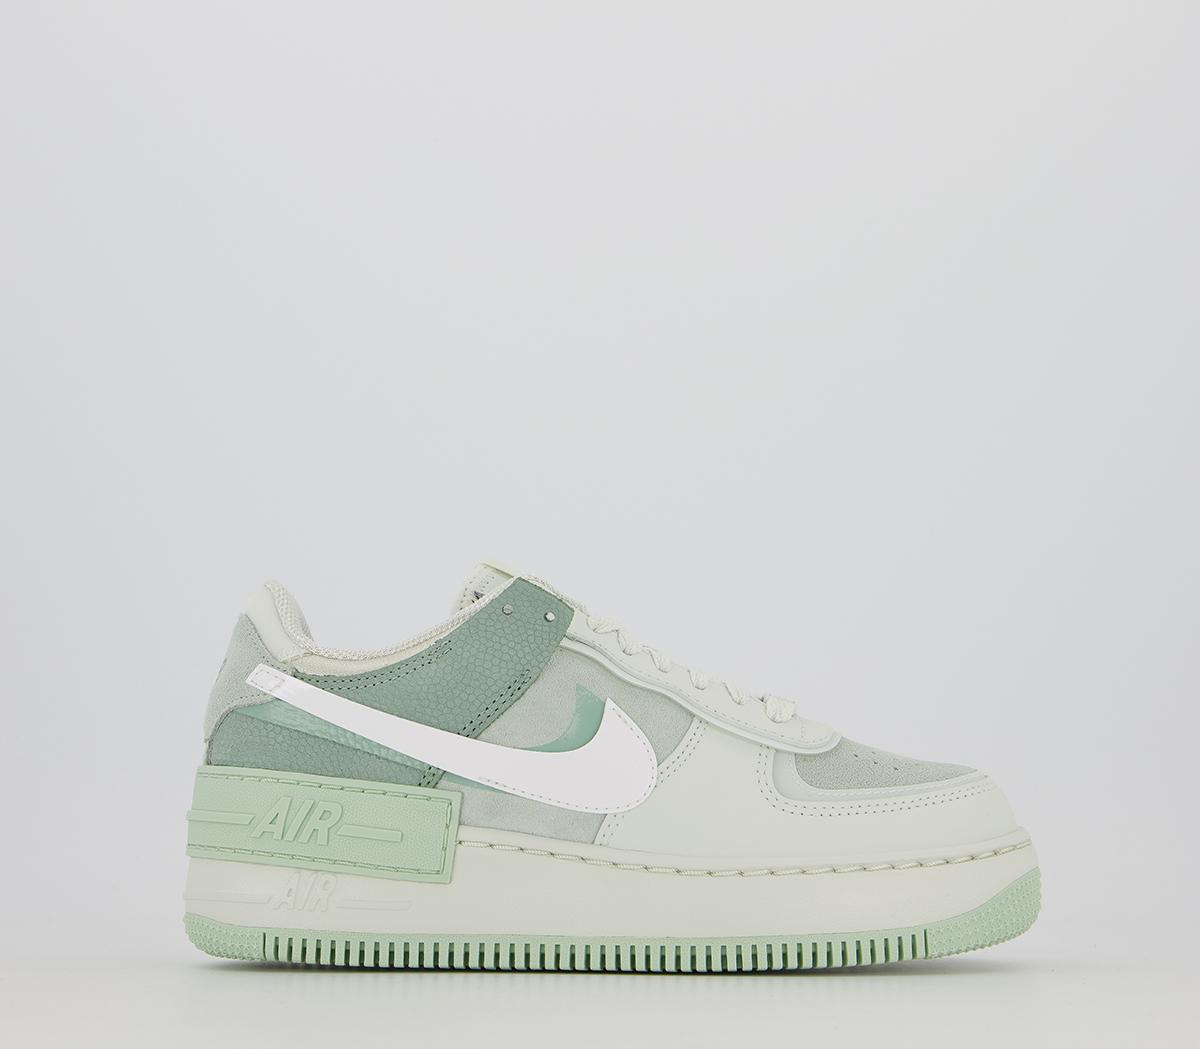 Bang om te sterven Pracht religie Nike Air Force 1 Shadow Trainers Spruce Aura White Pistachio Frost -  Women's Trainers